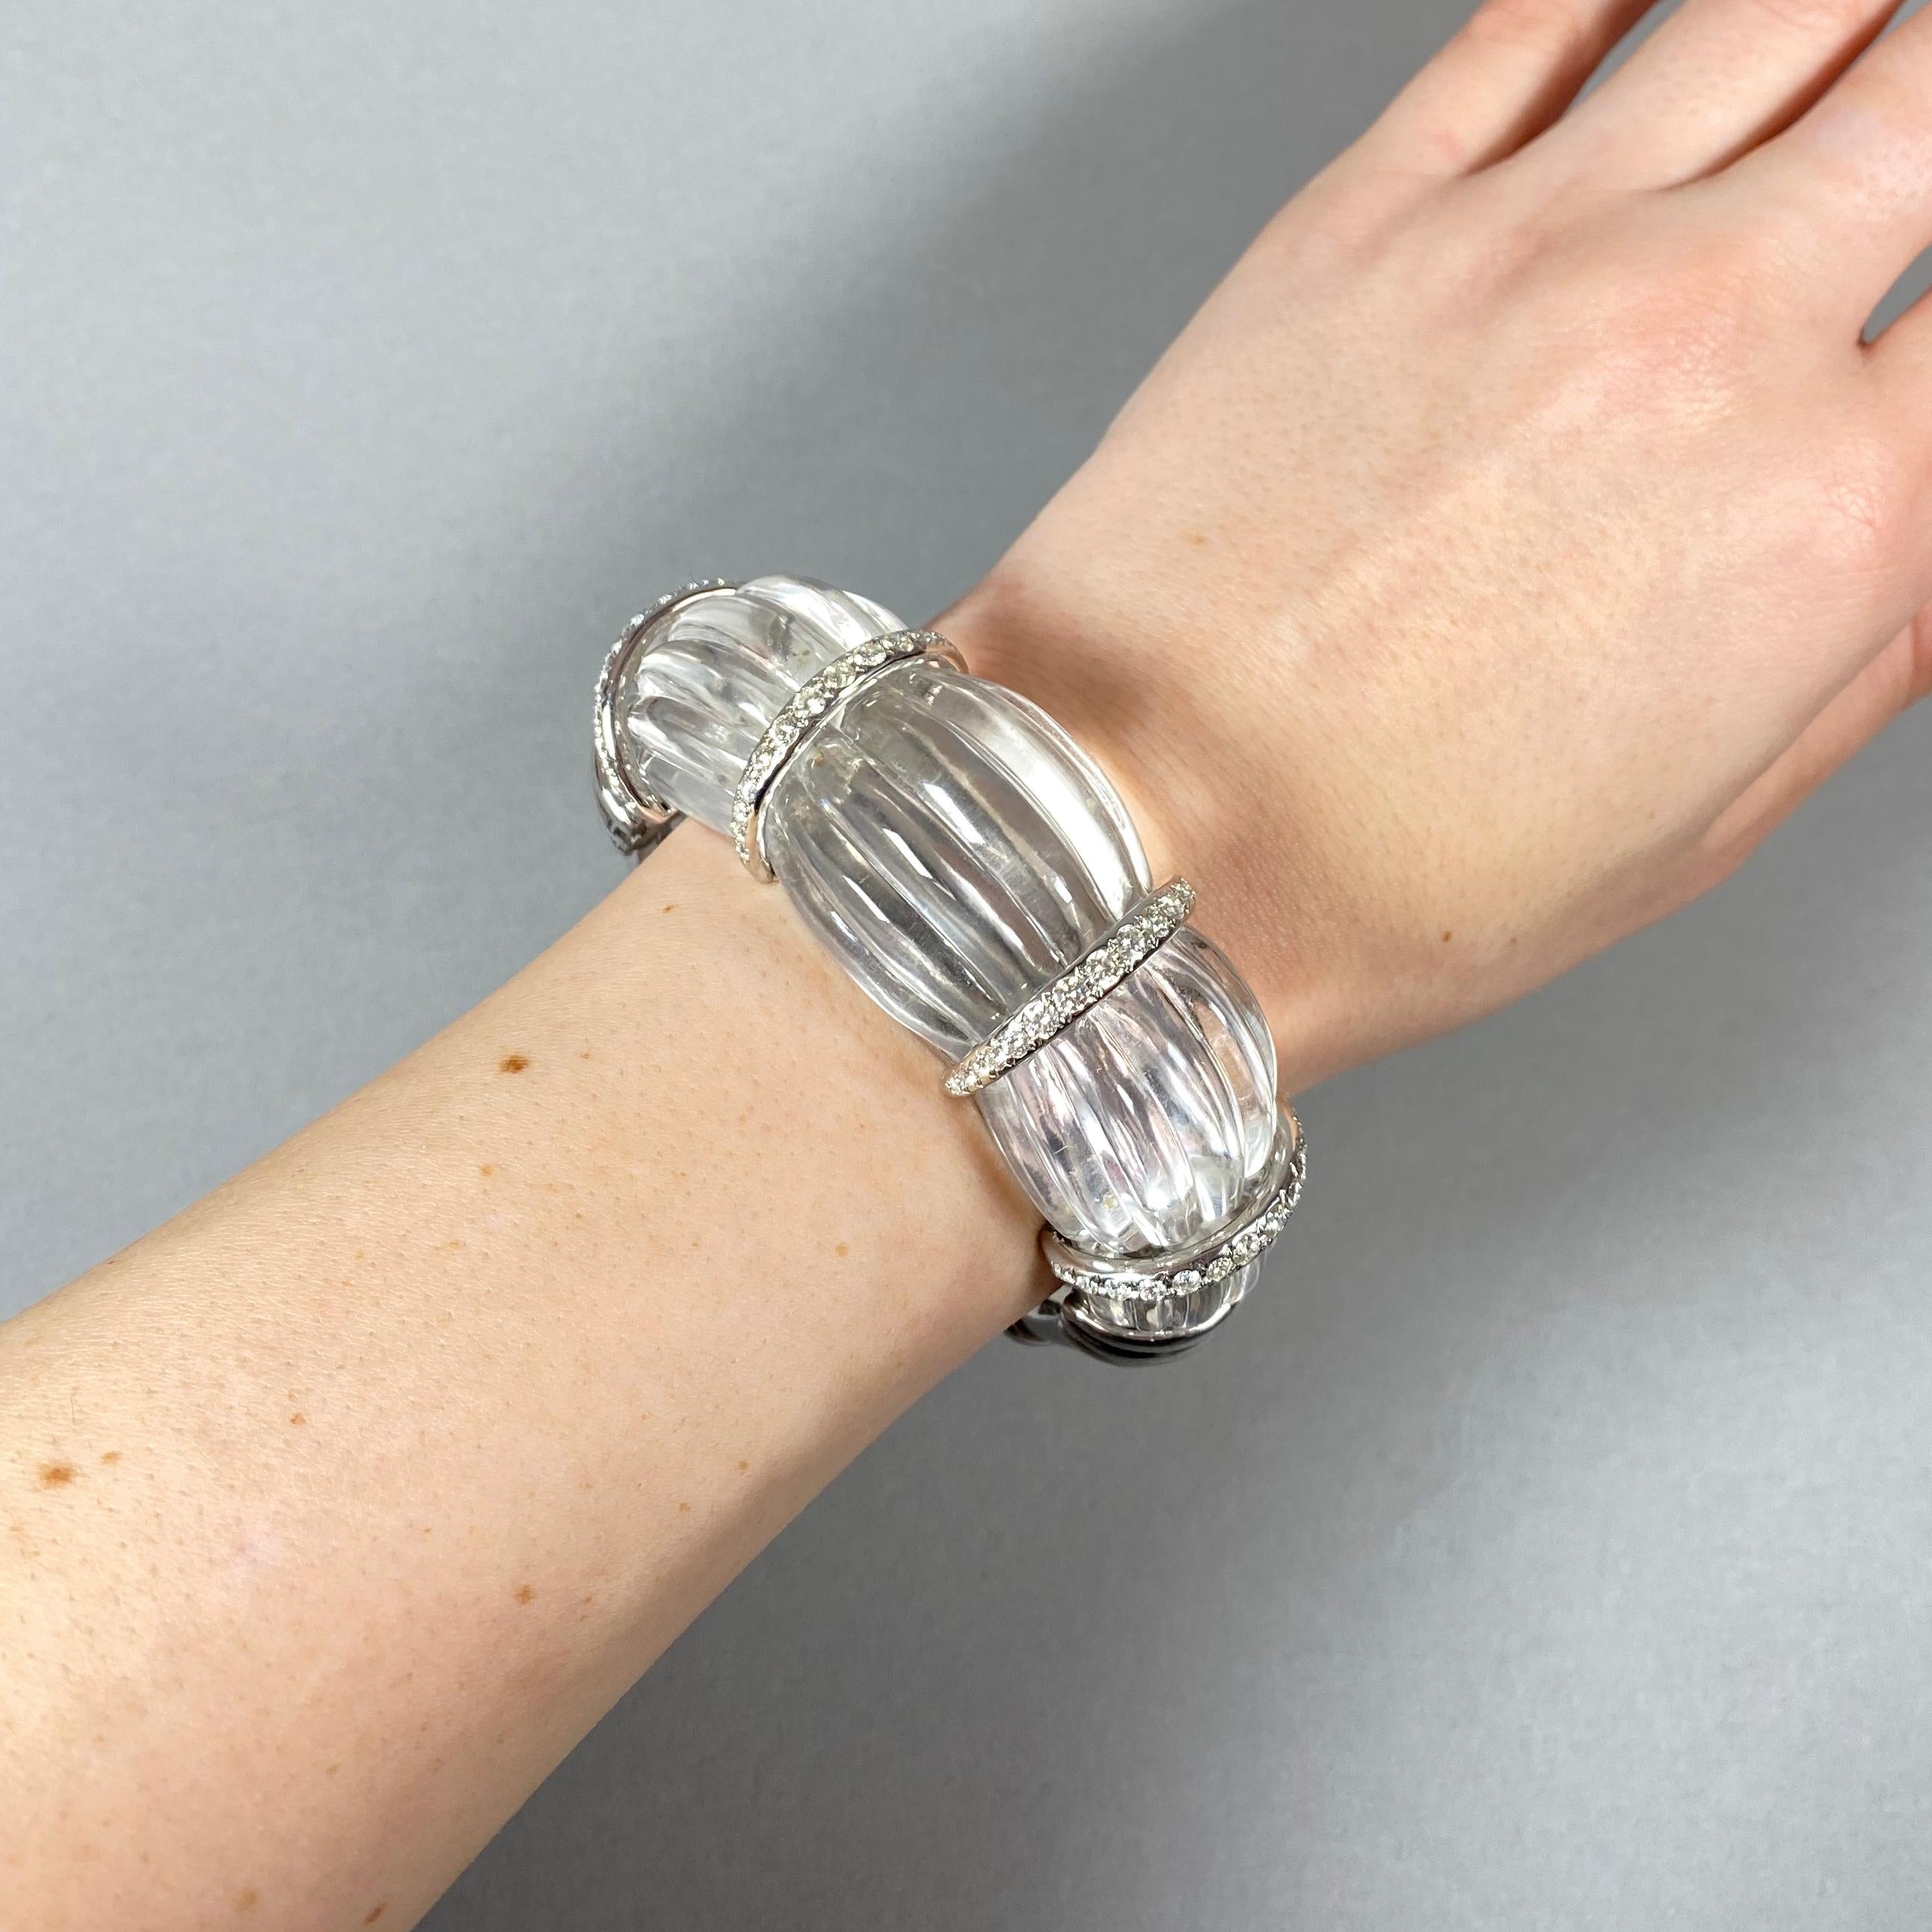 A modern, fluted rock crystal bangle bracelet, carved from one single piece of rock crystal, with four 18ct white gold spacer sections, each set with round brilliant-cut diamonds, weighing an estimated total of 2.50 carats, with 18ct white gold